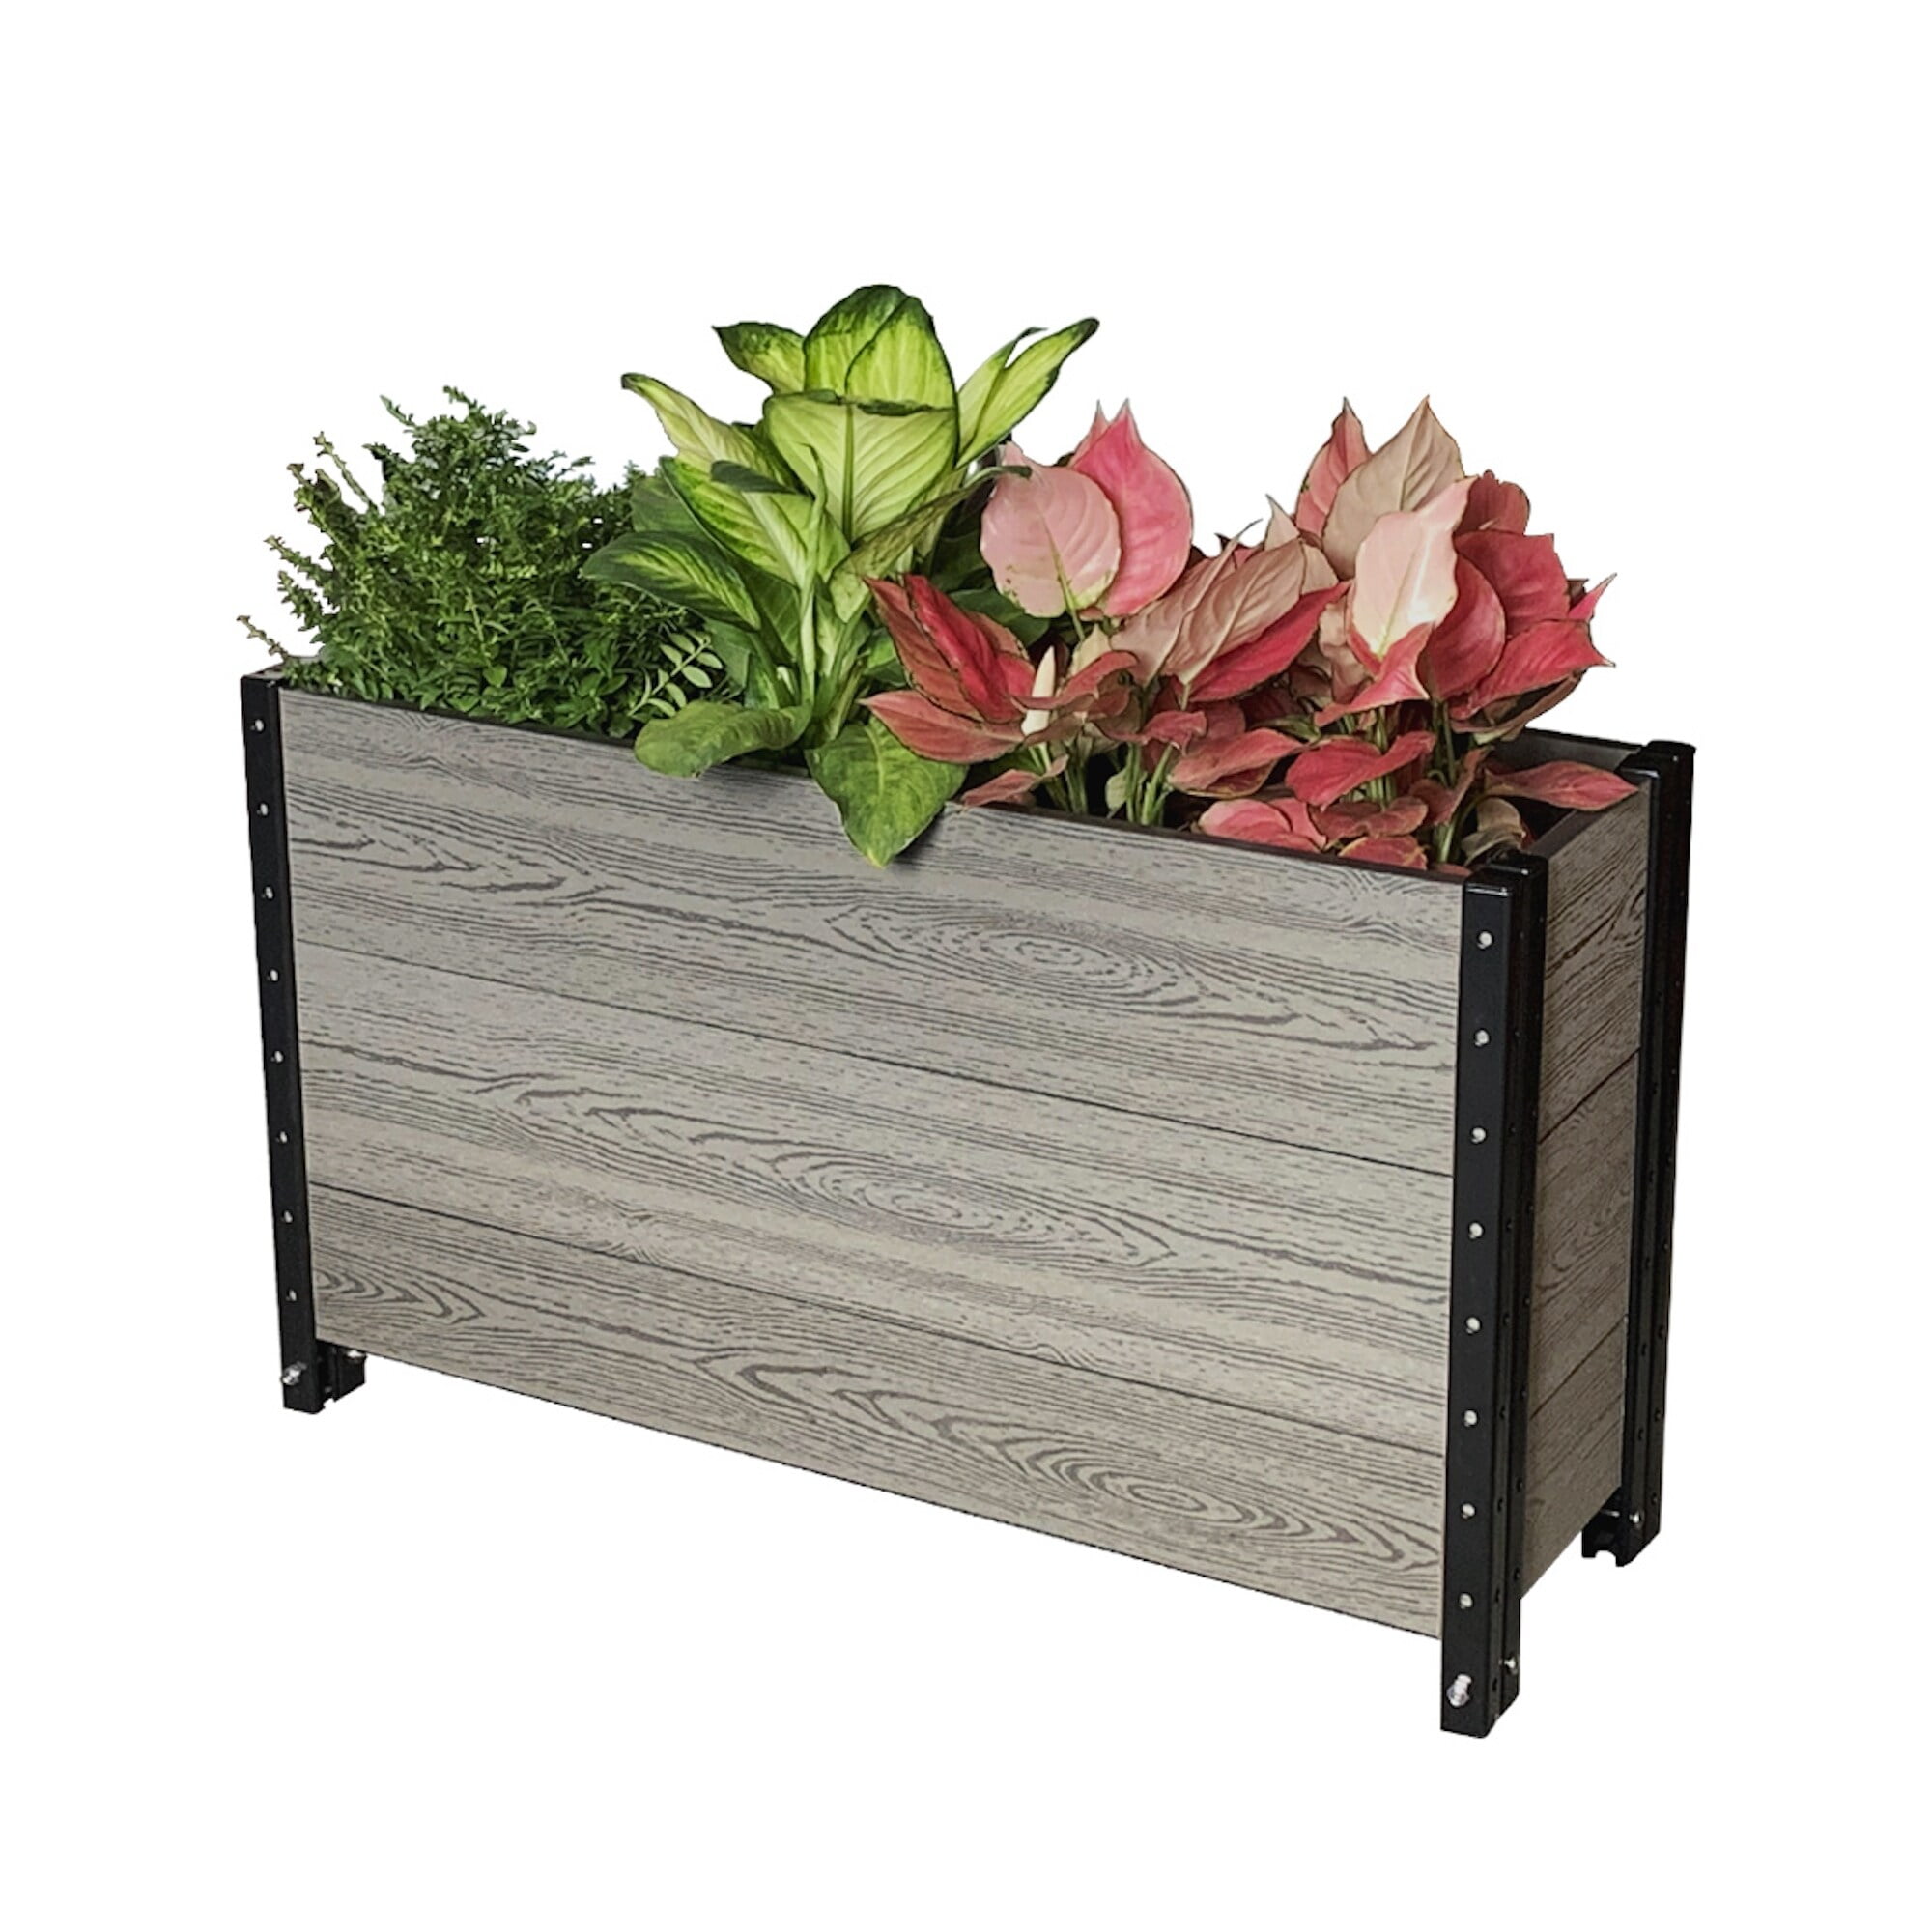 Picture of Everbloom E213612G 36 x 12 x 21 in. Elevated Deep Trough Planter in Grey